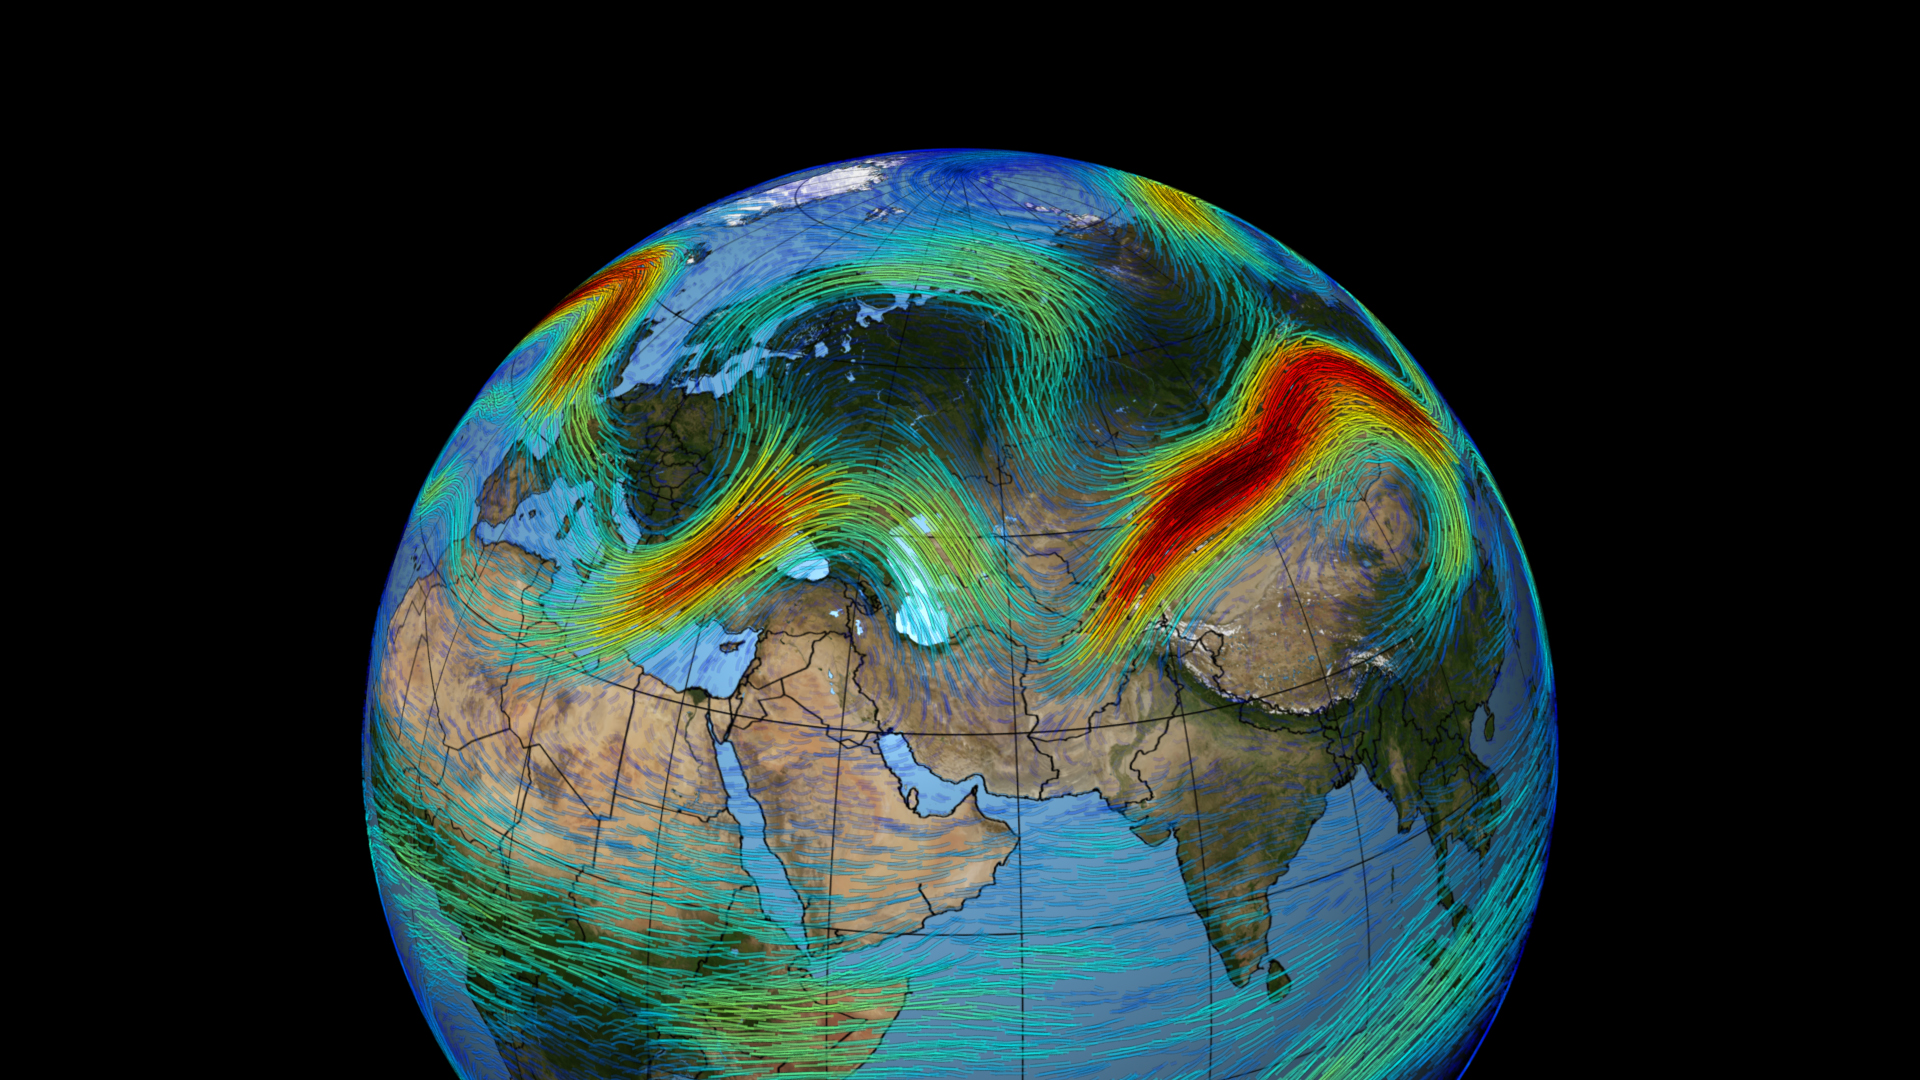 Discover how jet streams influence weather and climate on Earth.